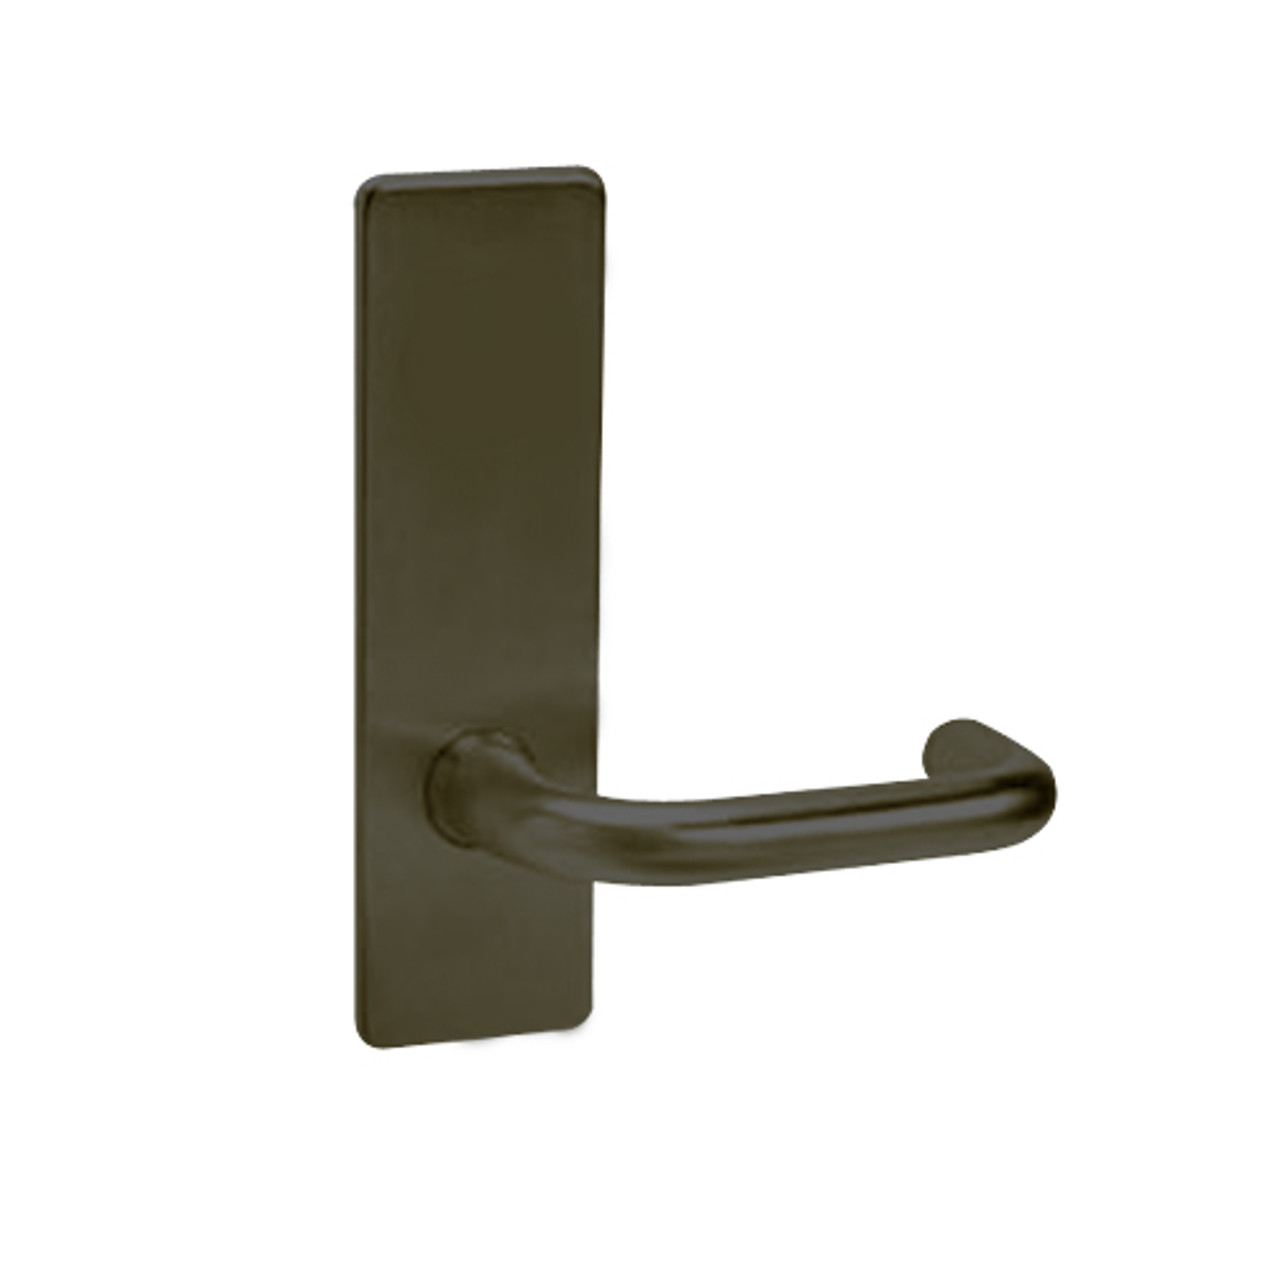 ML2020-LSM-613-M31 Corbin Russwin ML2000 Series Mortise Privacy Locksets with Lustra Lever in Oil Rubbed Bronze